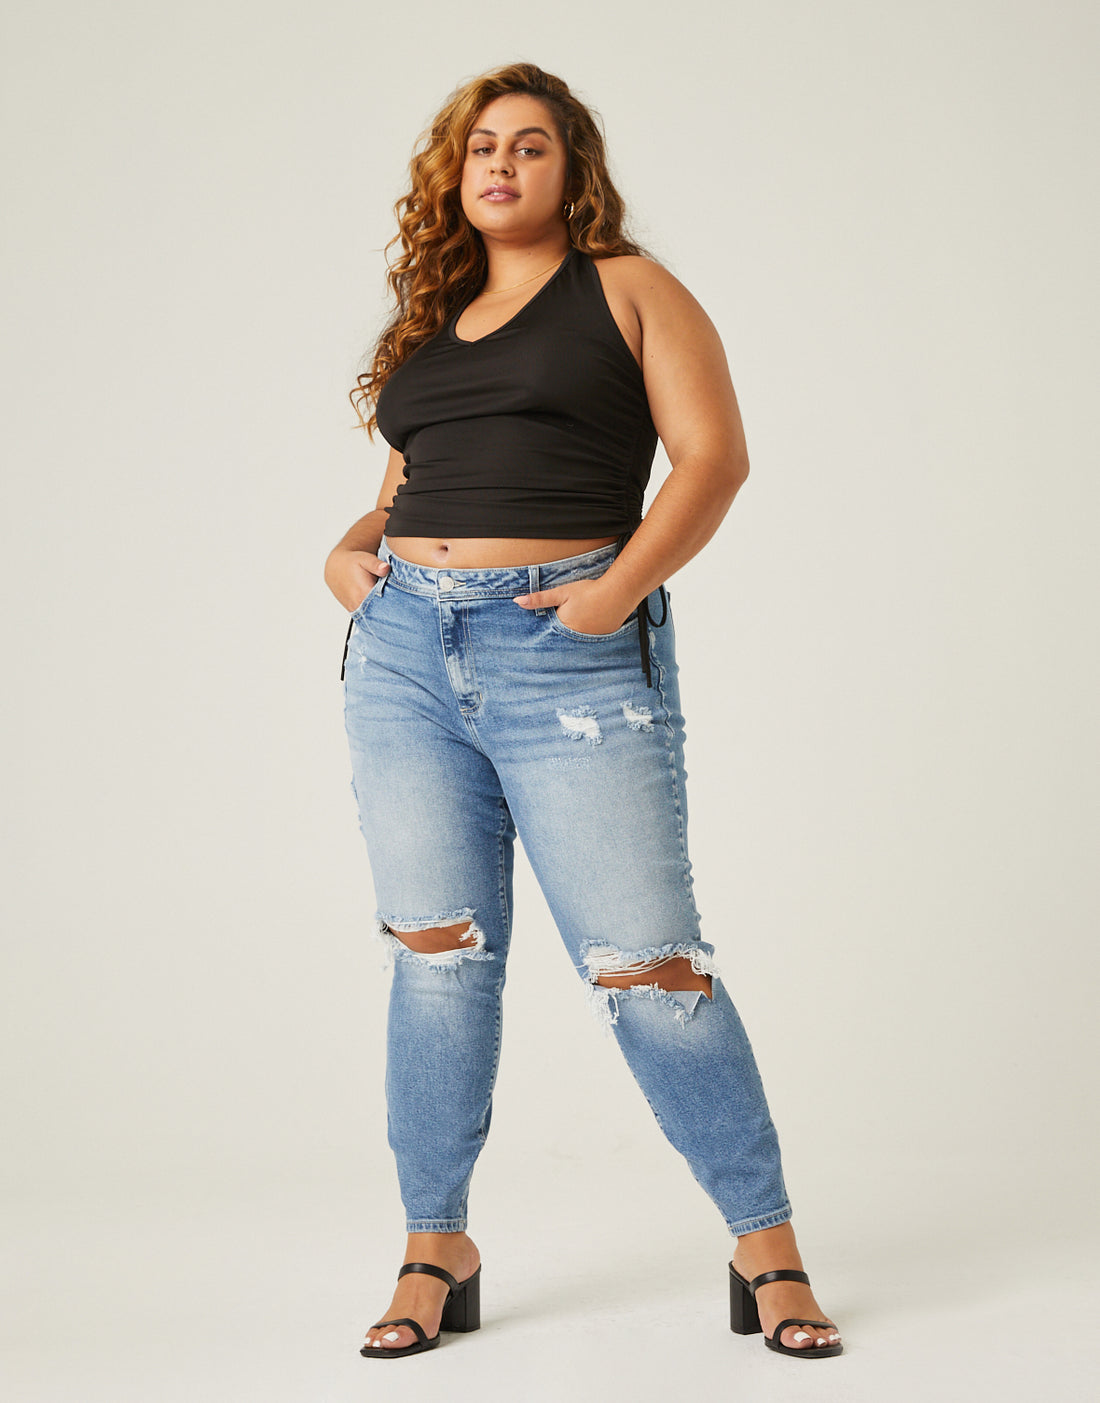 Curve Side Ruched Halter Top Plus Size Tops -2020AVE